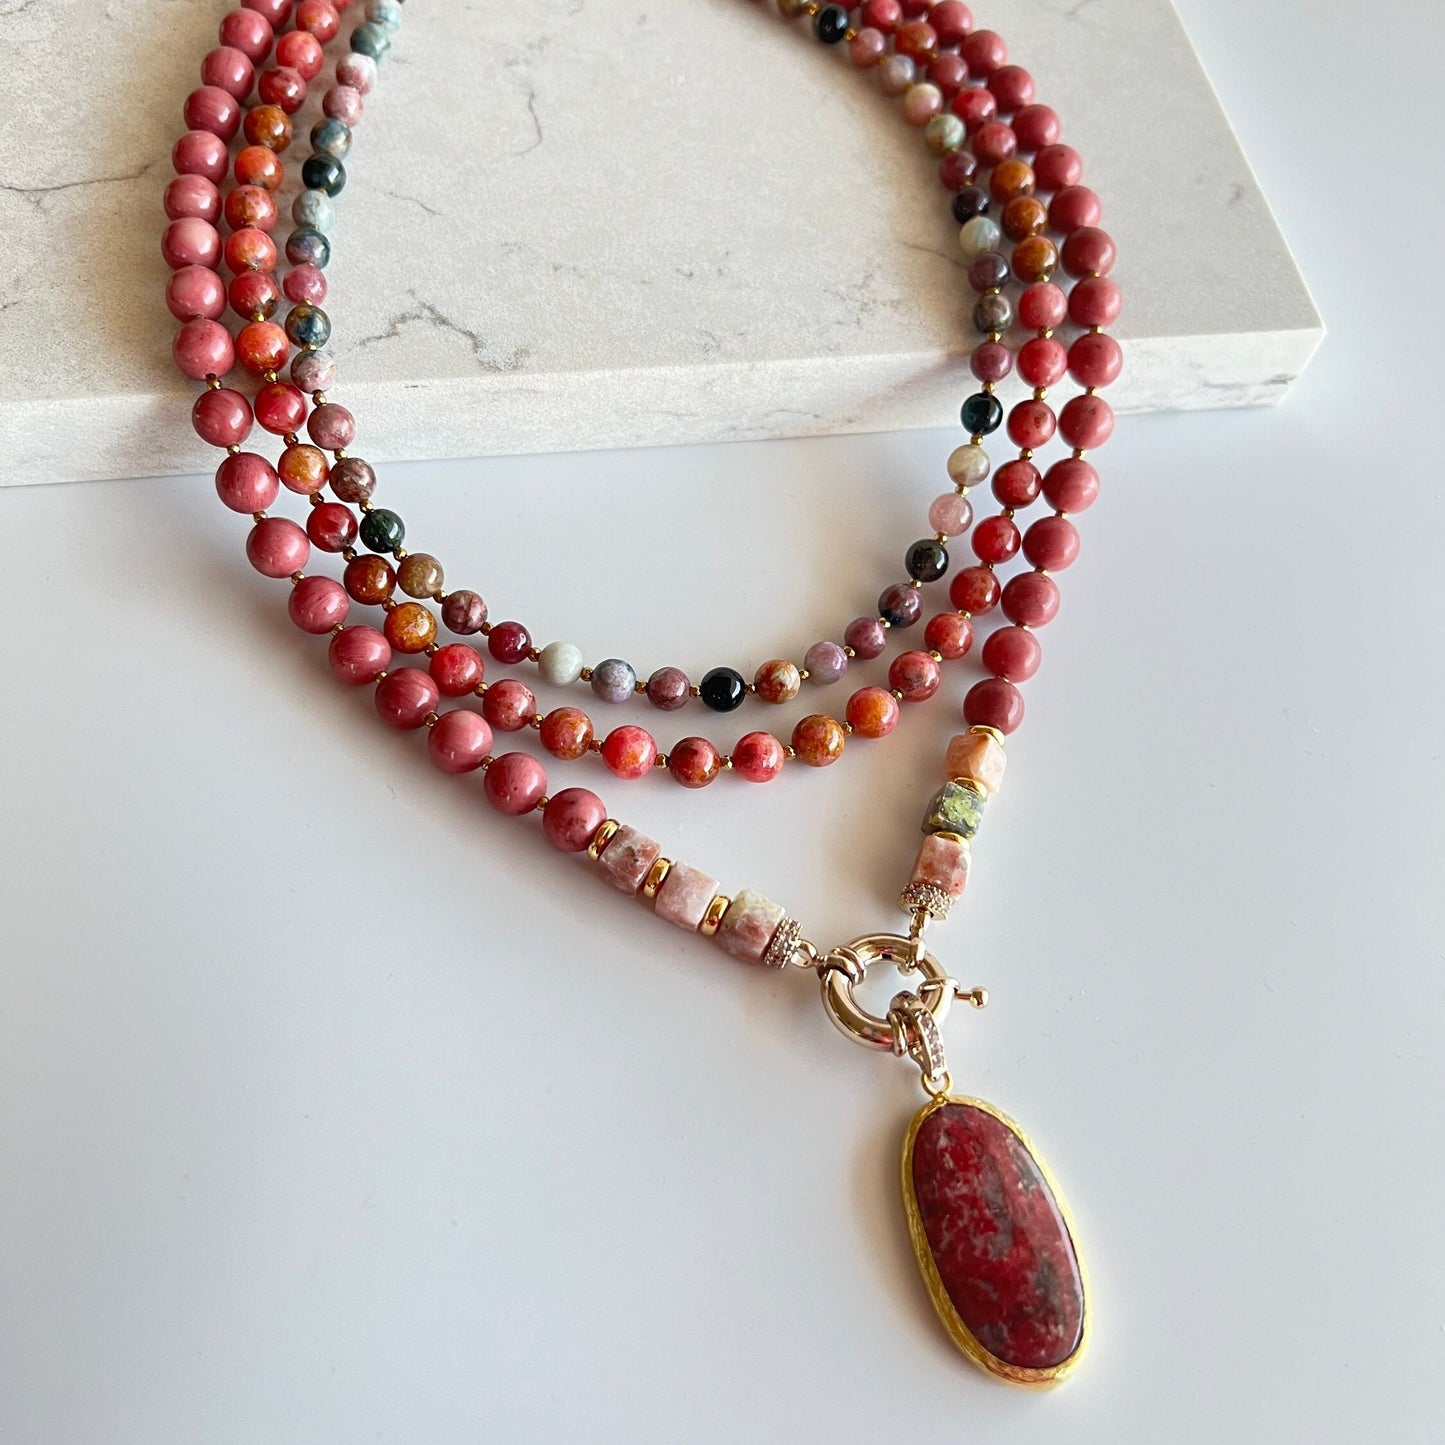 Gemstone Necklace, Pink Handmade Jewelry, Beaded Rhodonite and Tourmaline Necklace